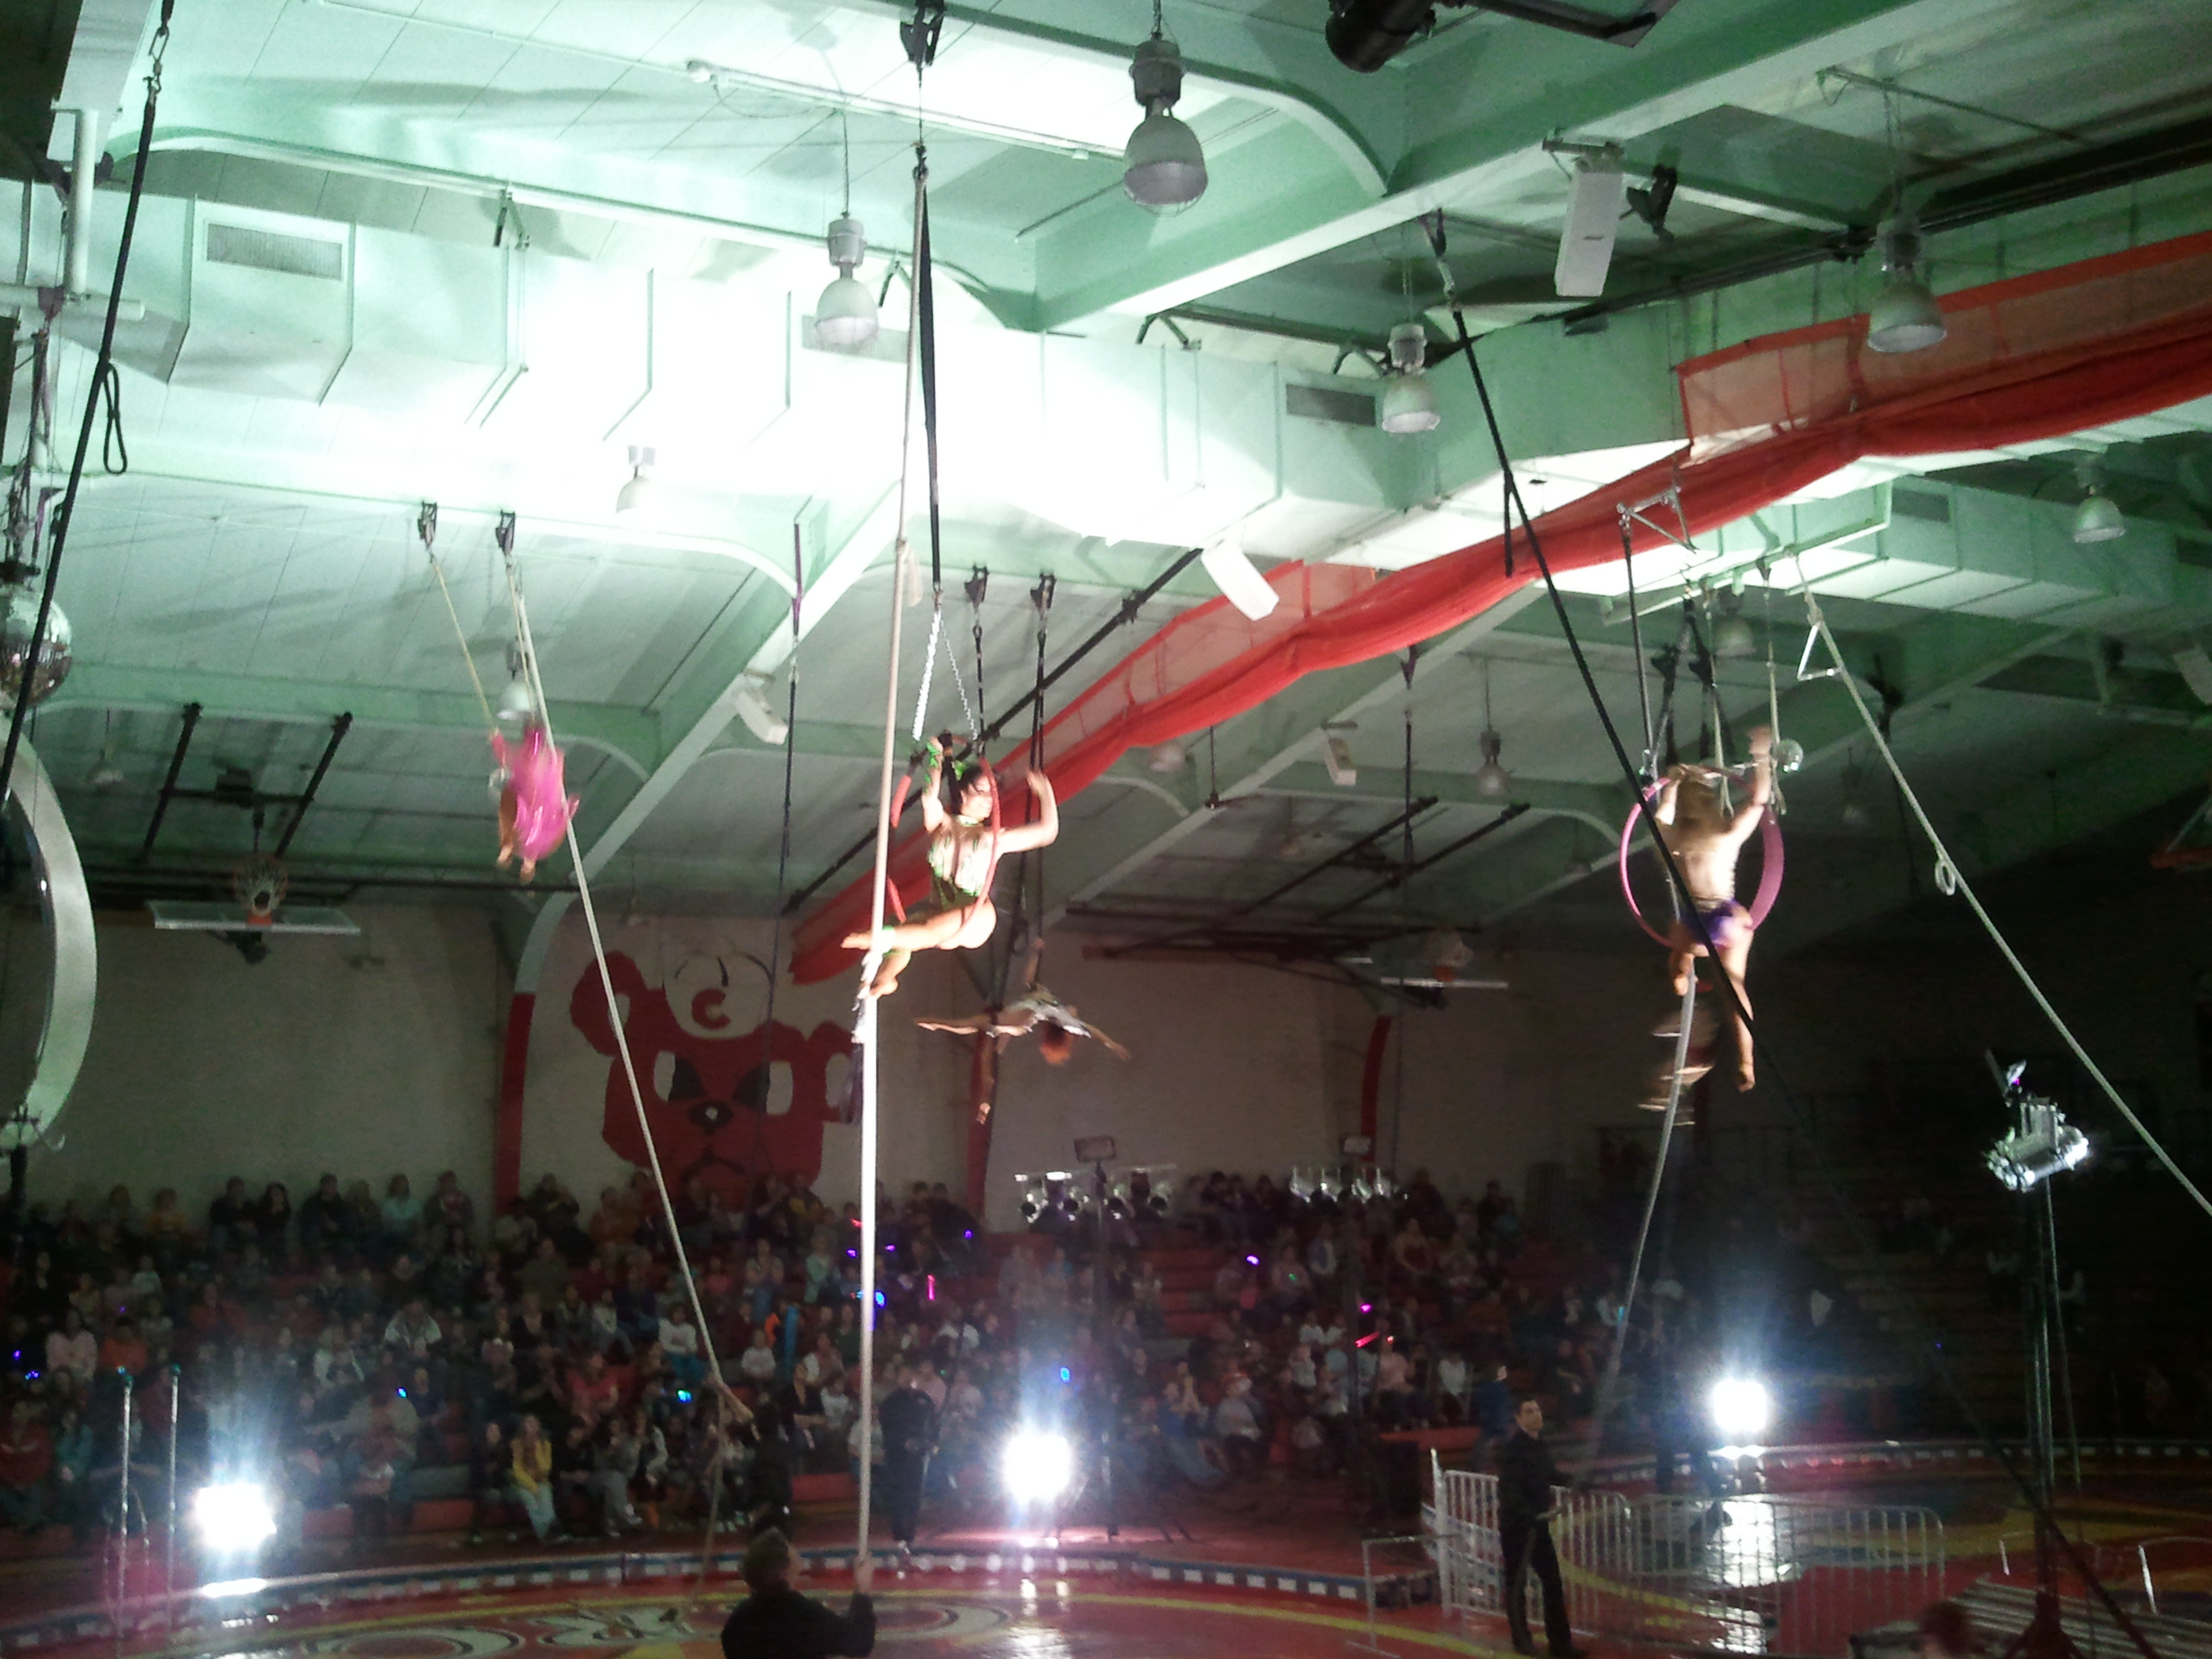 The students at St. Joseph’s Indian School undoubtedly enjoyed the circus!